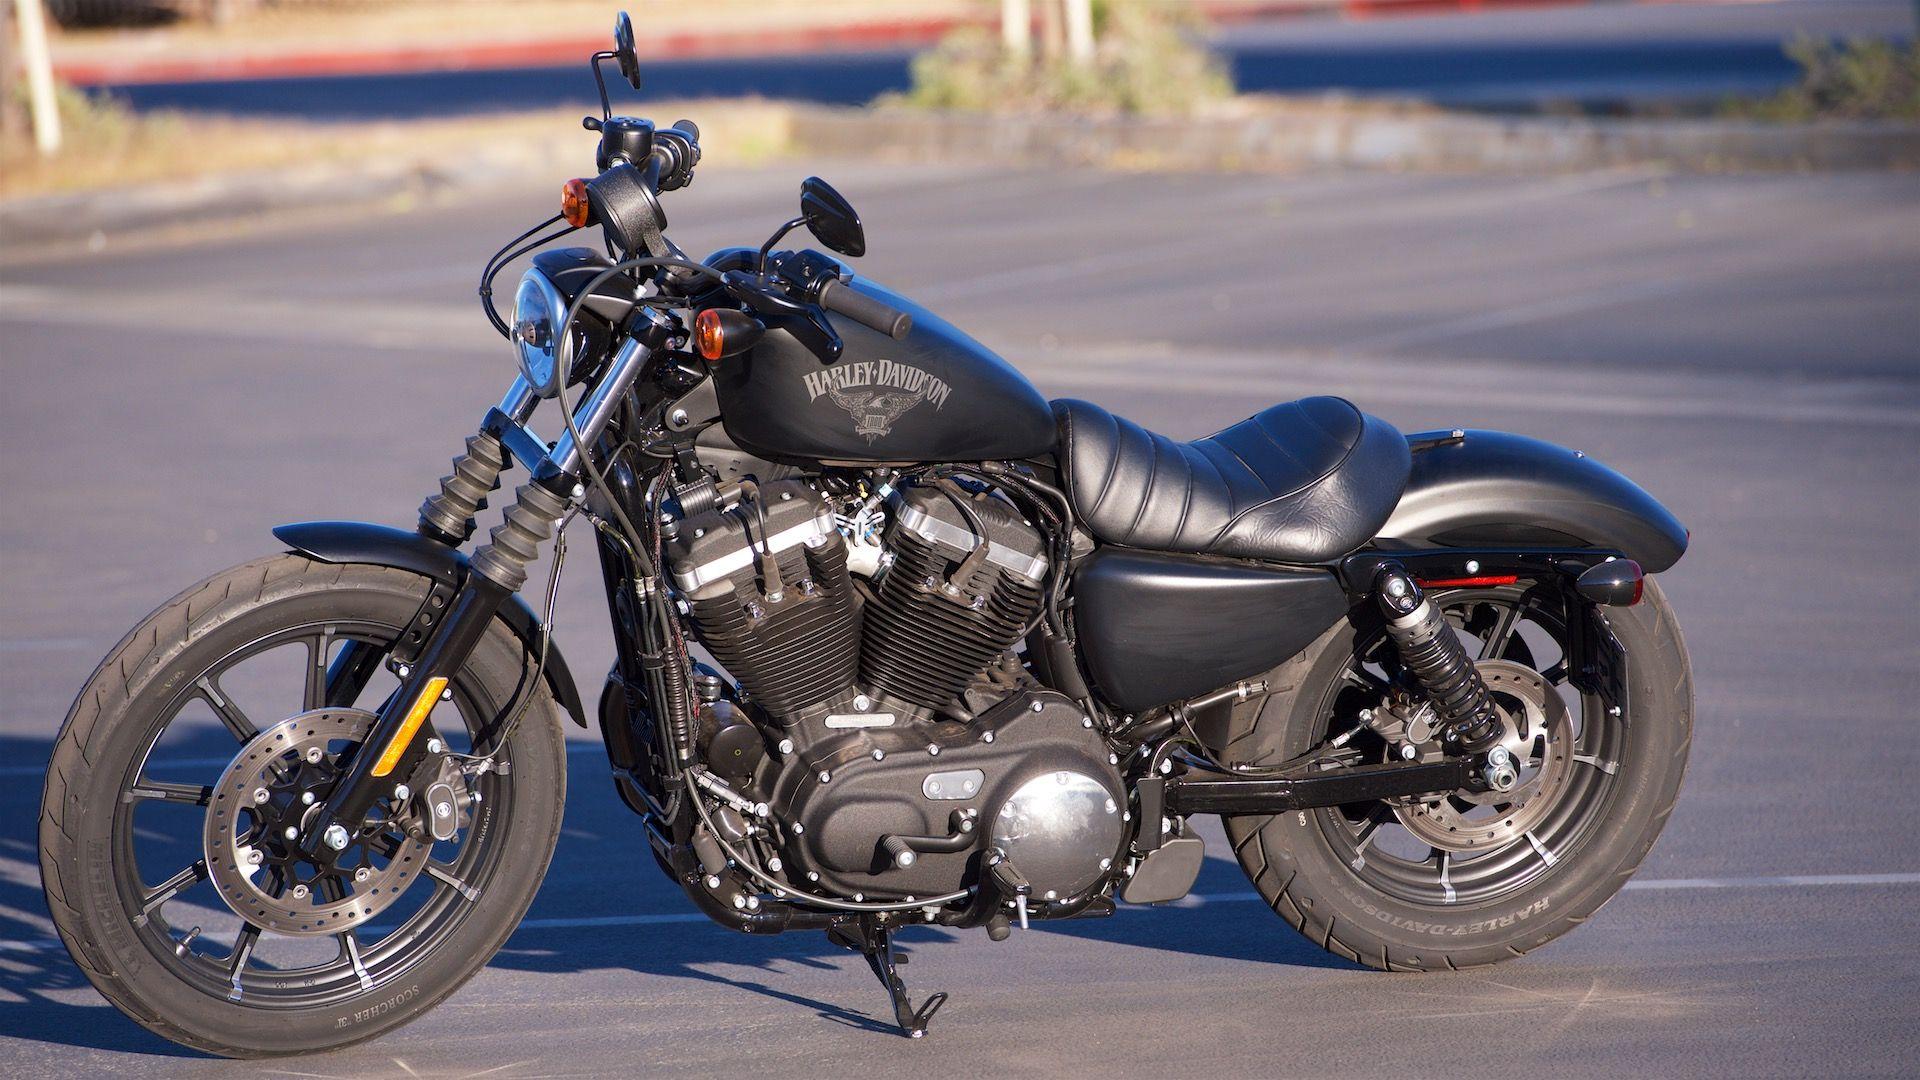 Harley Davidson Sportster Iron 883 Review. Basics Done Right